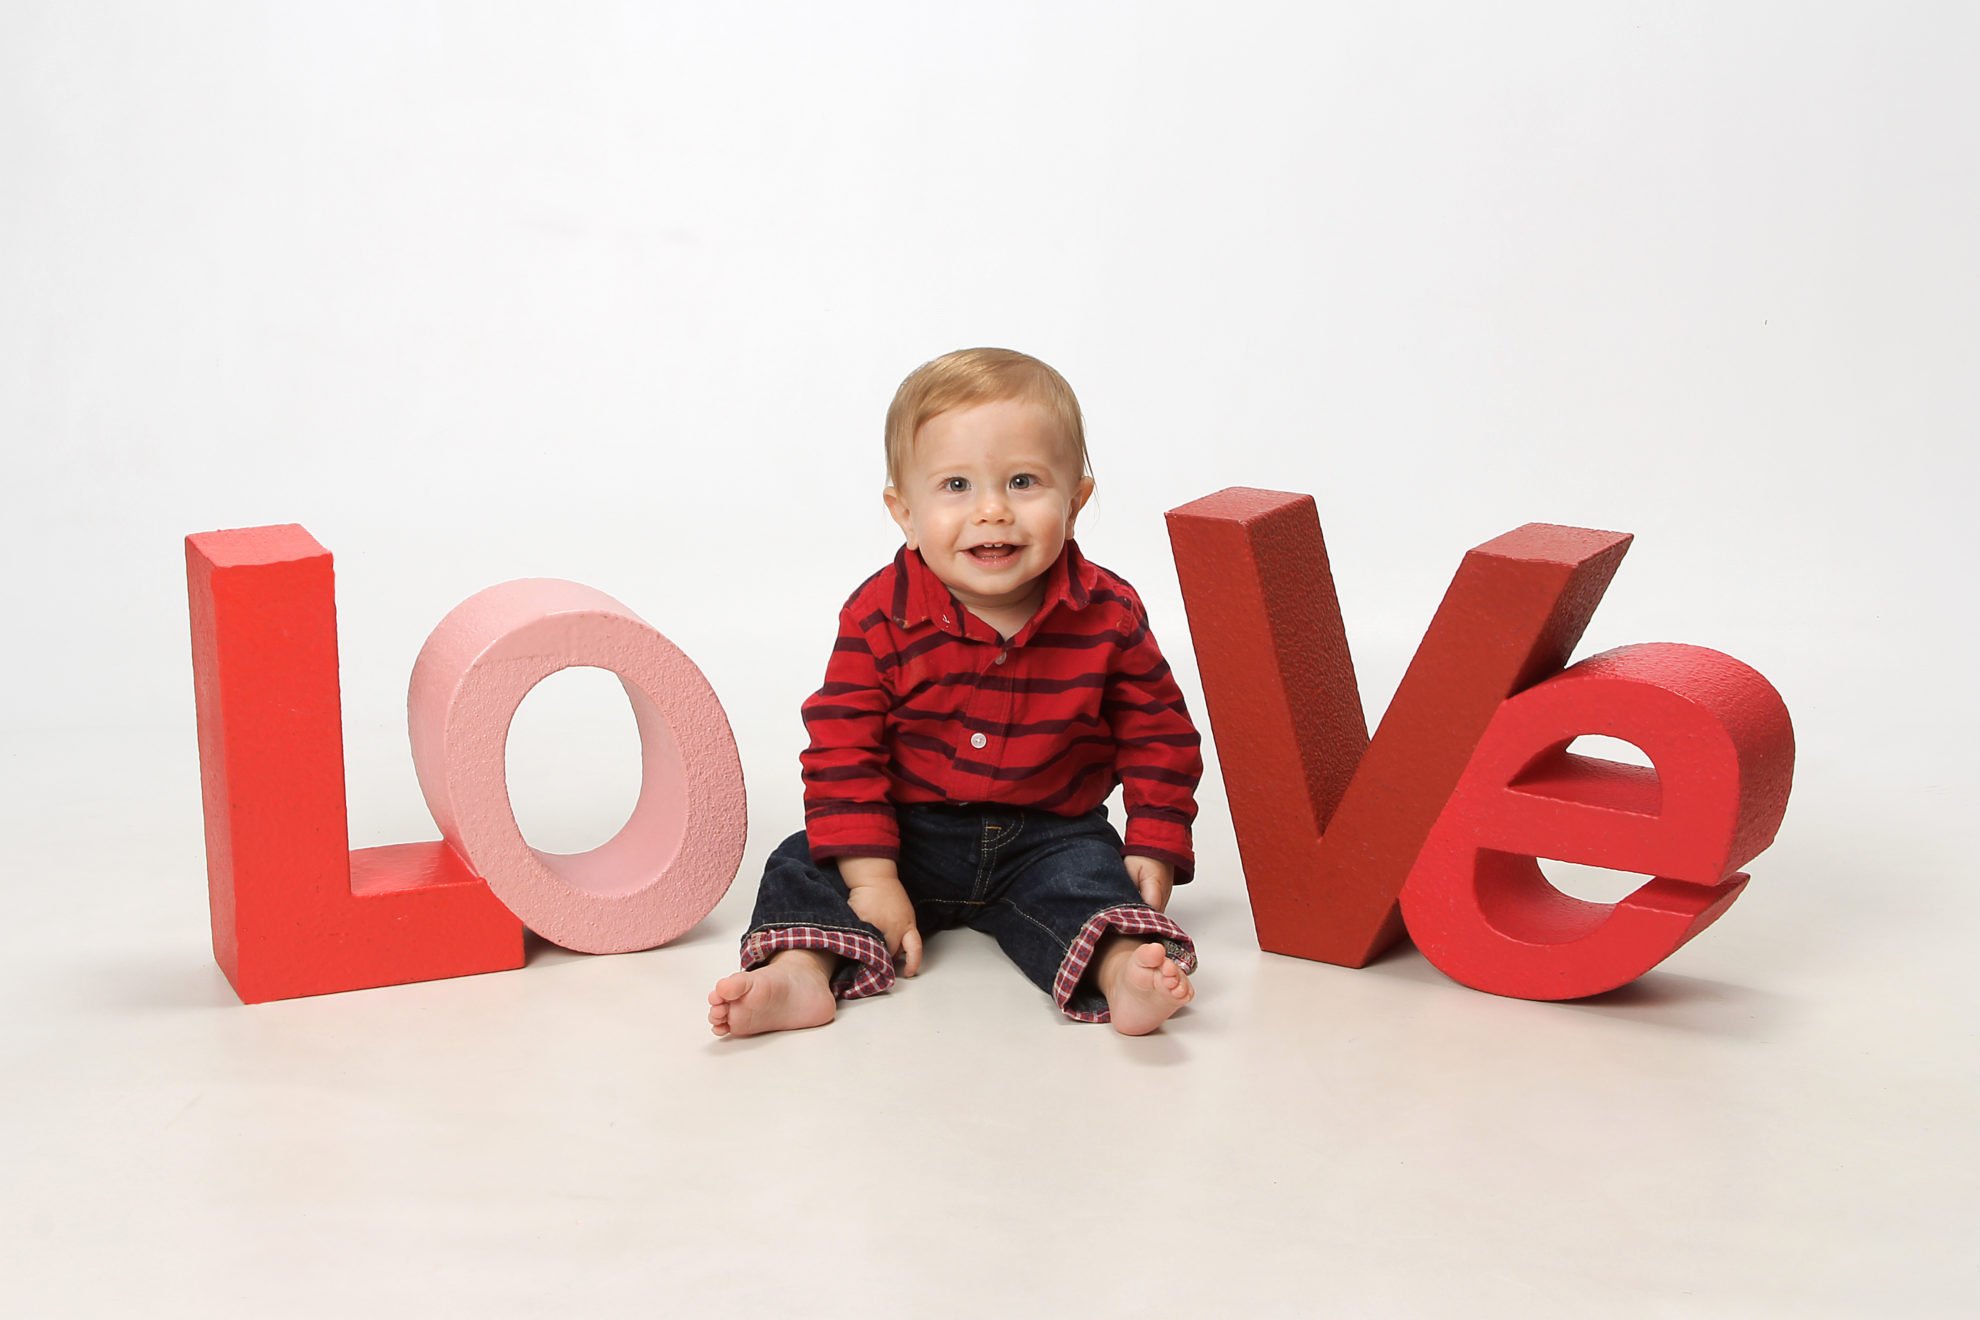 The letters "l o v e" with a baby sitting in the middle.